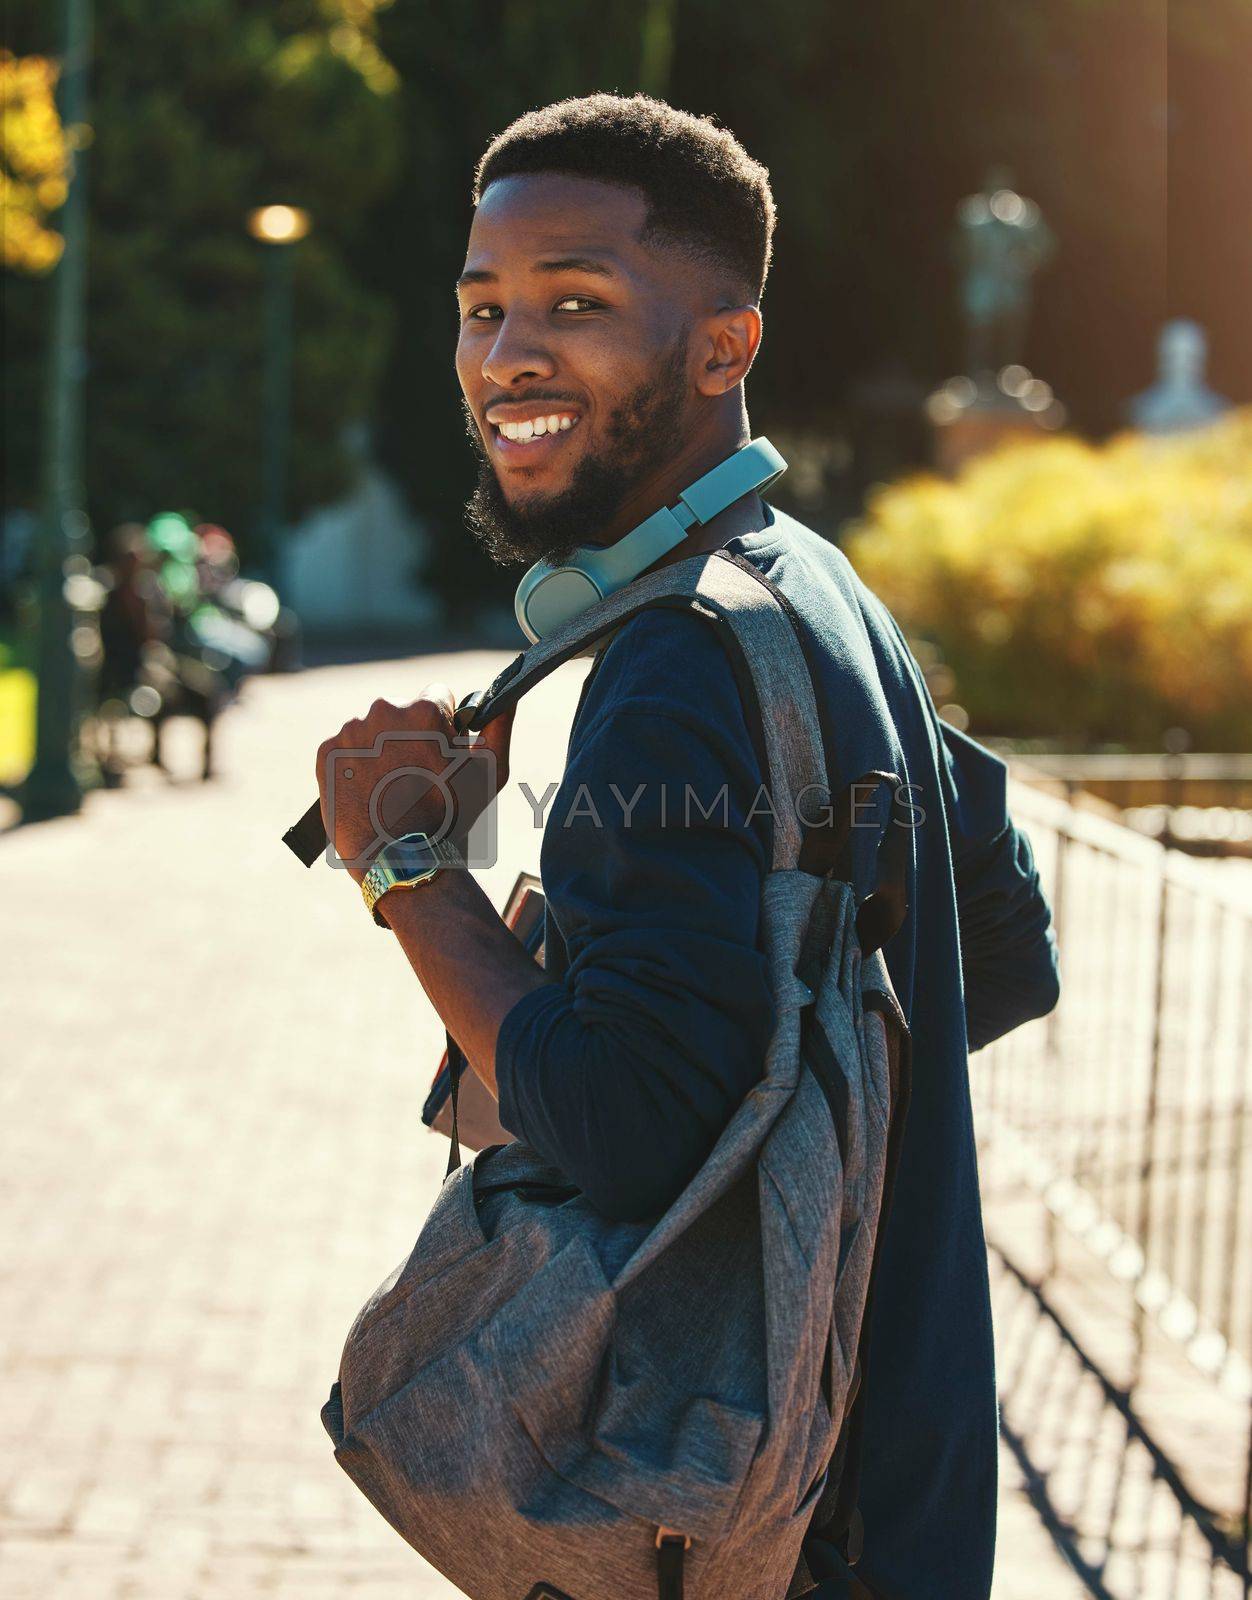 Royalty free image of Black man, student on campus for university in outdoor portrait, education and study with backpack. College, smile and higher education with learning for development and scholarship, going to class. by YuriArcurs